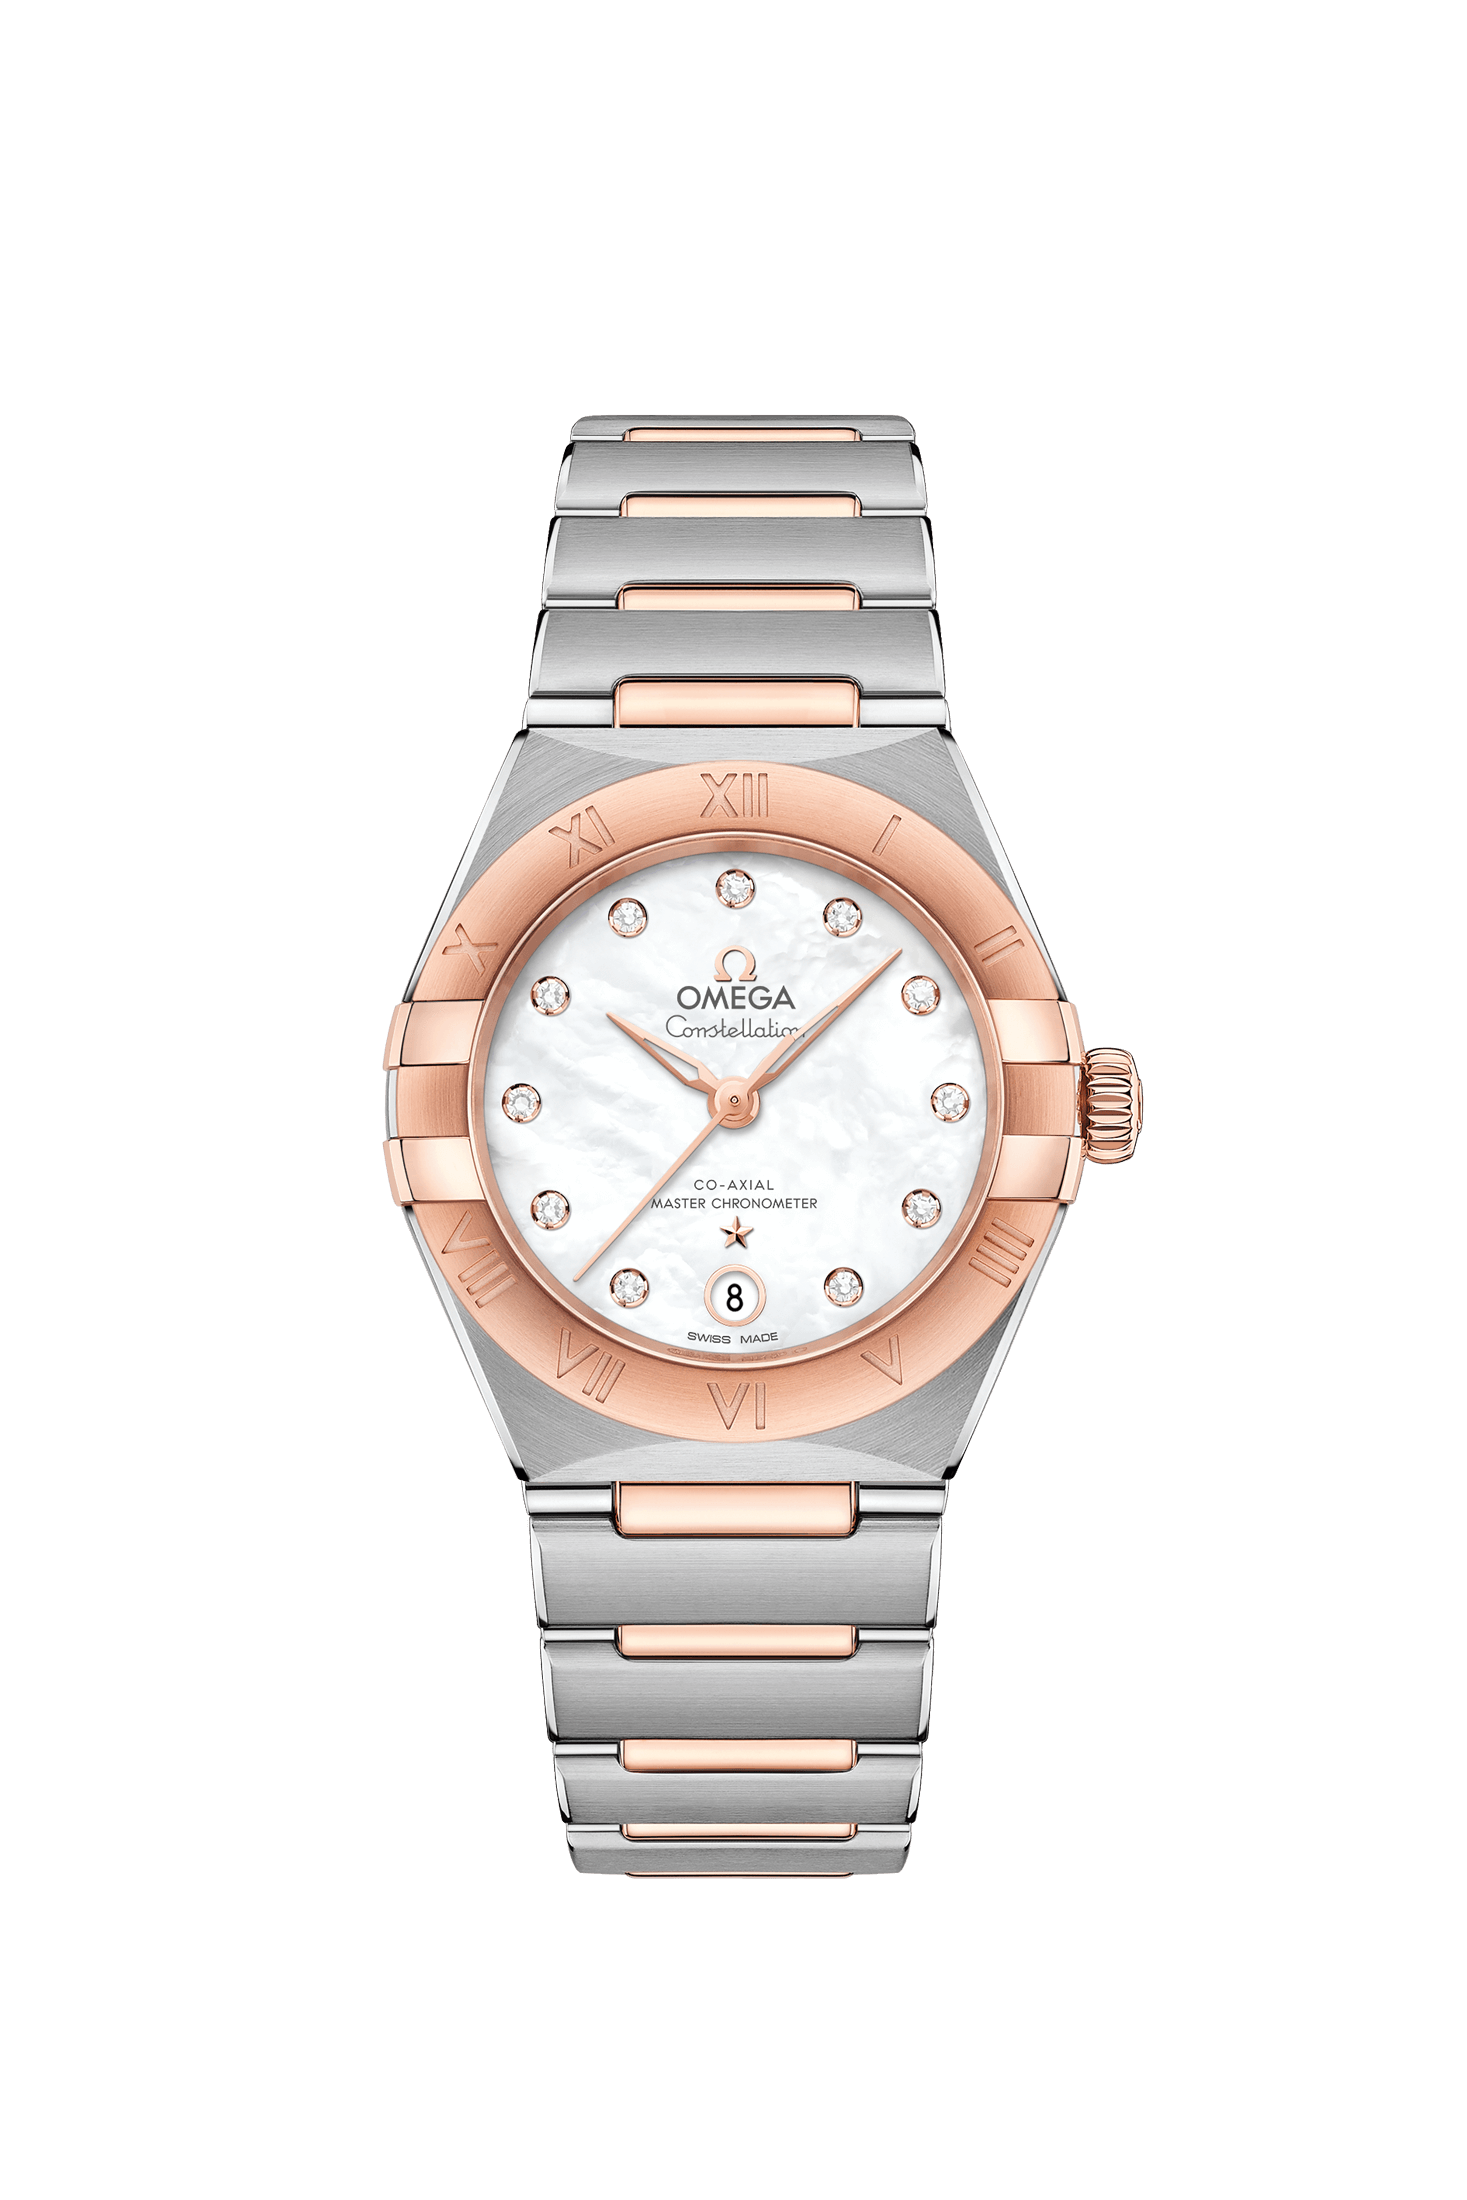 Ladies' watch  OMEGA, Constellation Co Axial Master Chronometer / 29mm, SKU: 131.20.29.20.55.001 | watchapproach.com